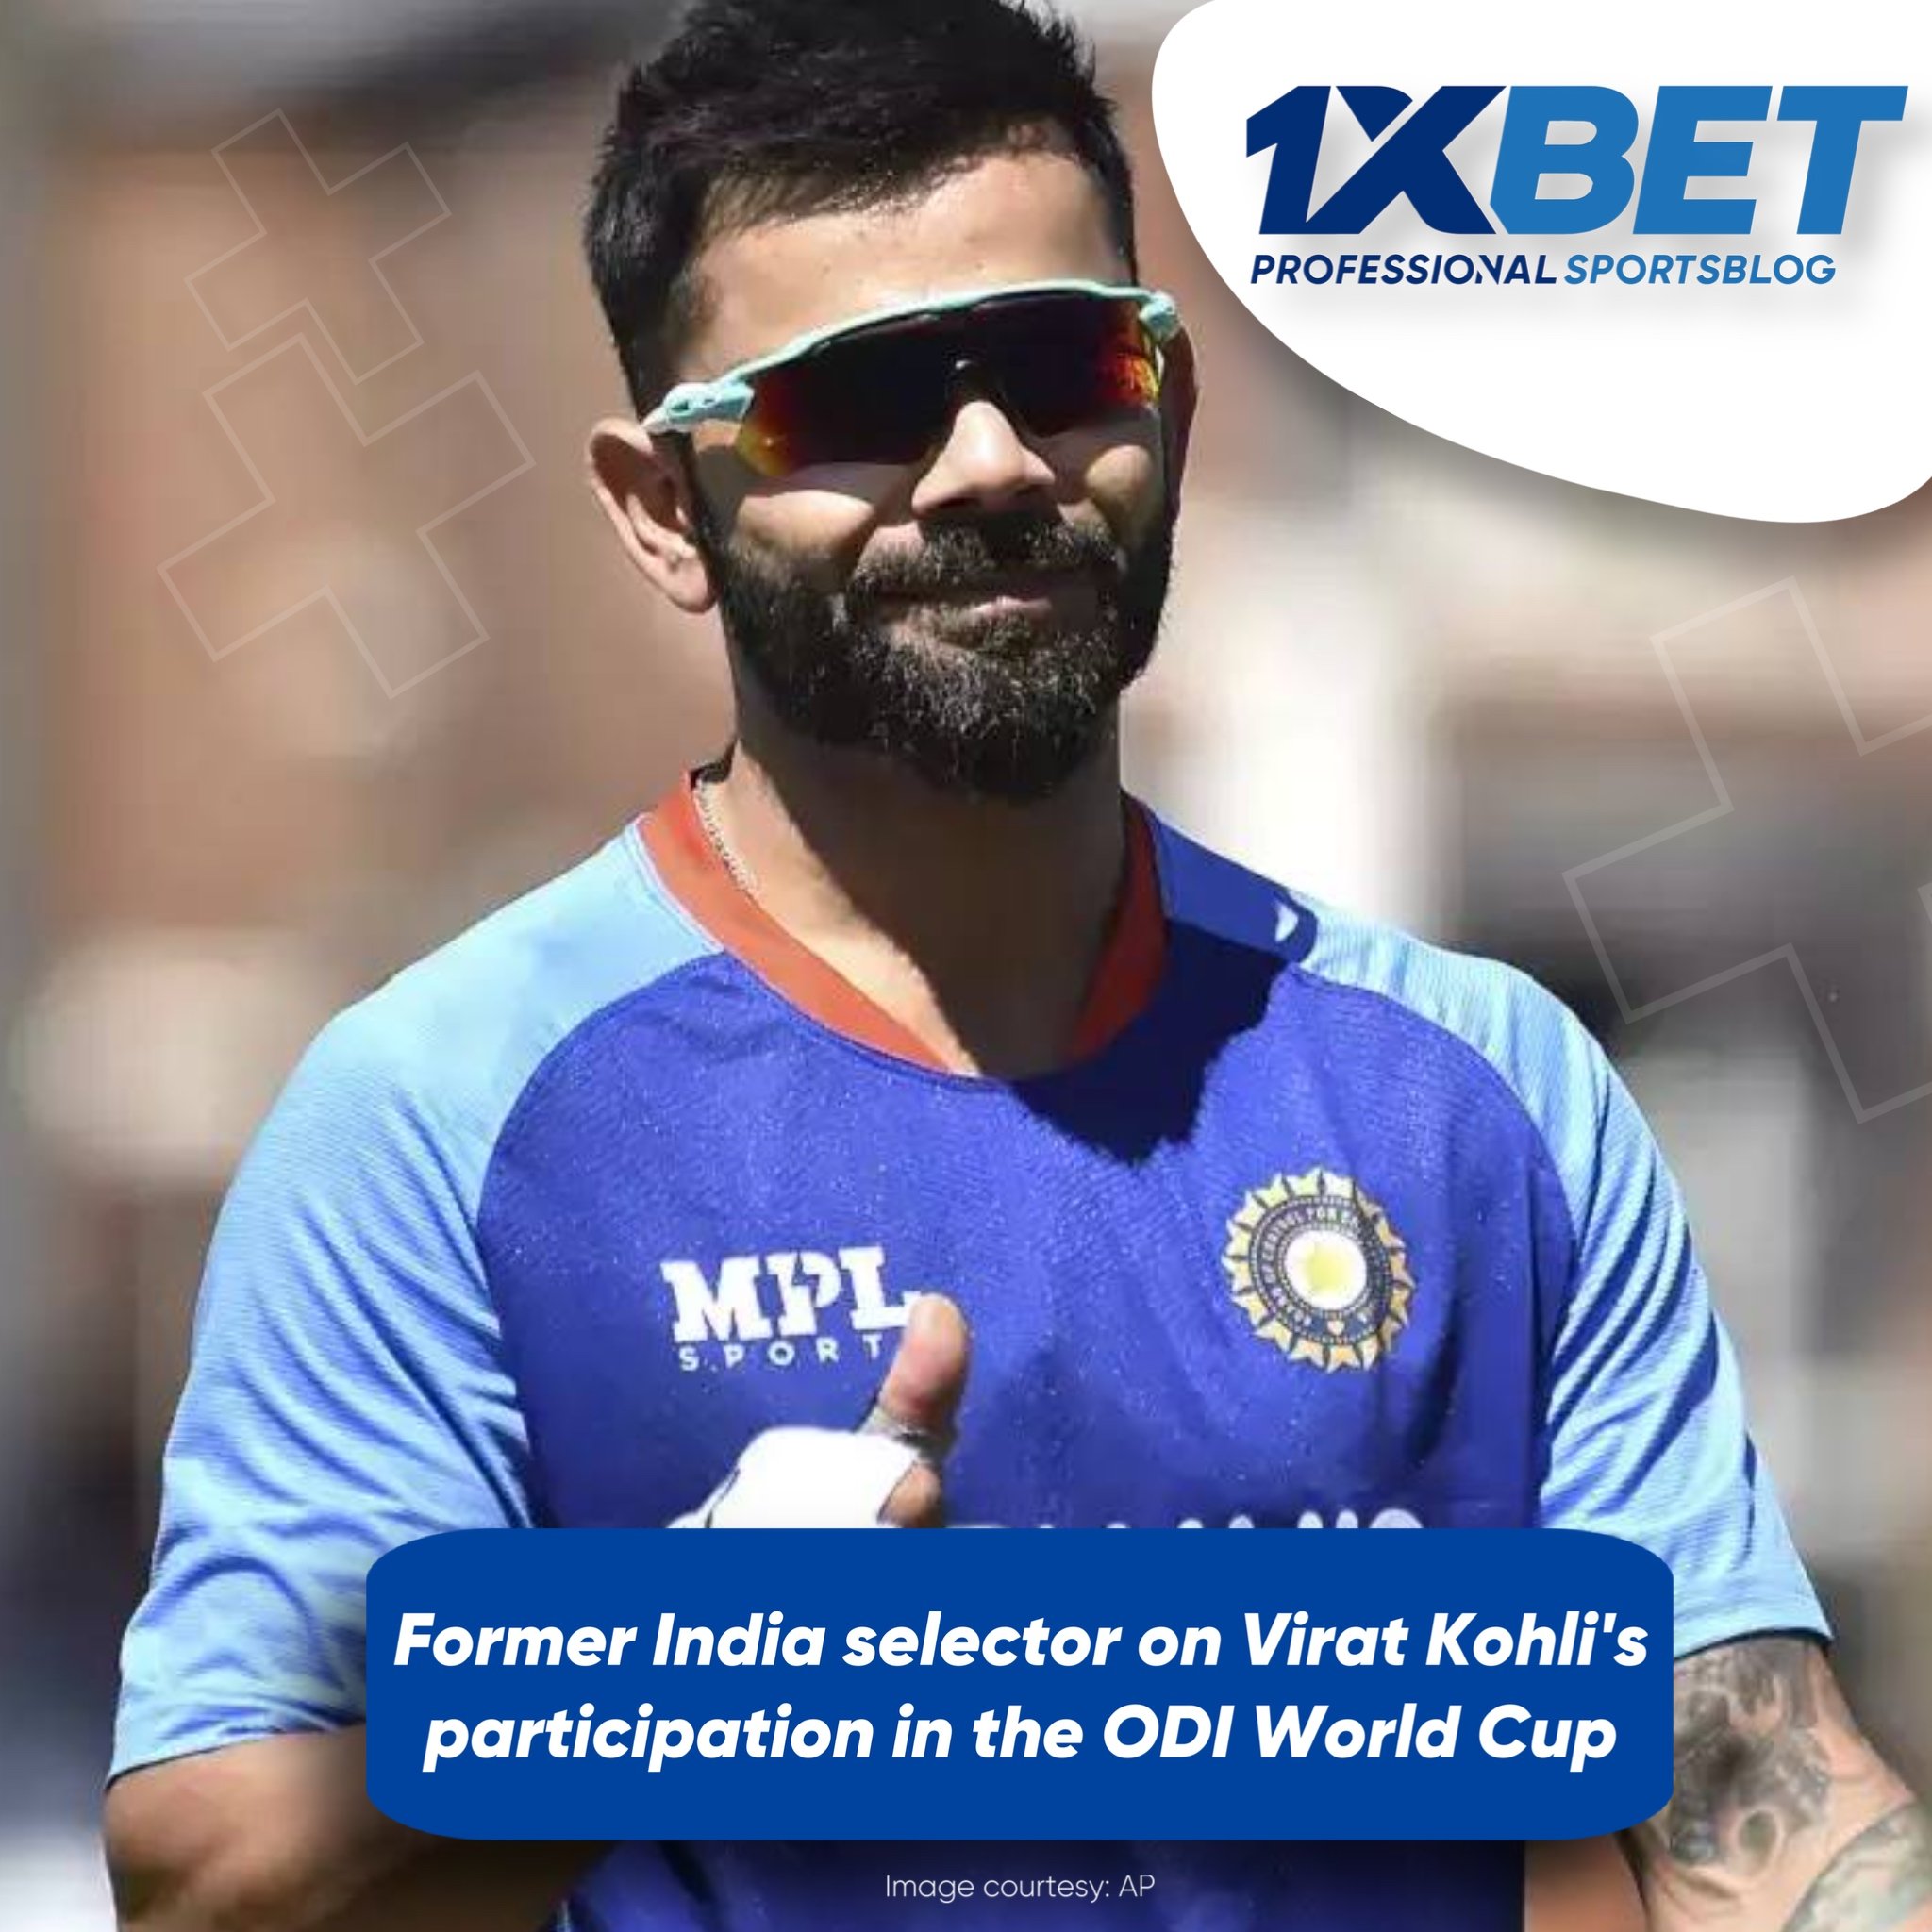 Former India selector on Virat Kohli's participation in the ODI World Cup